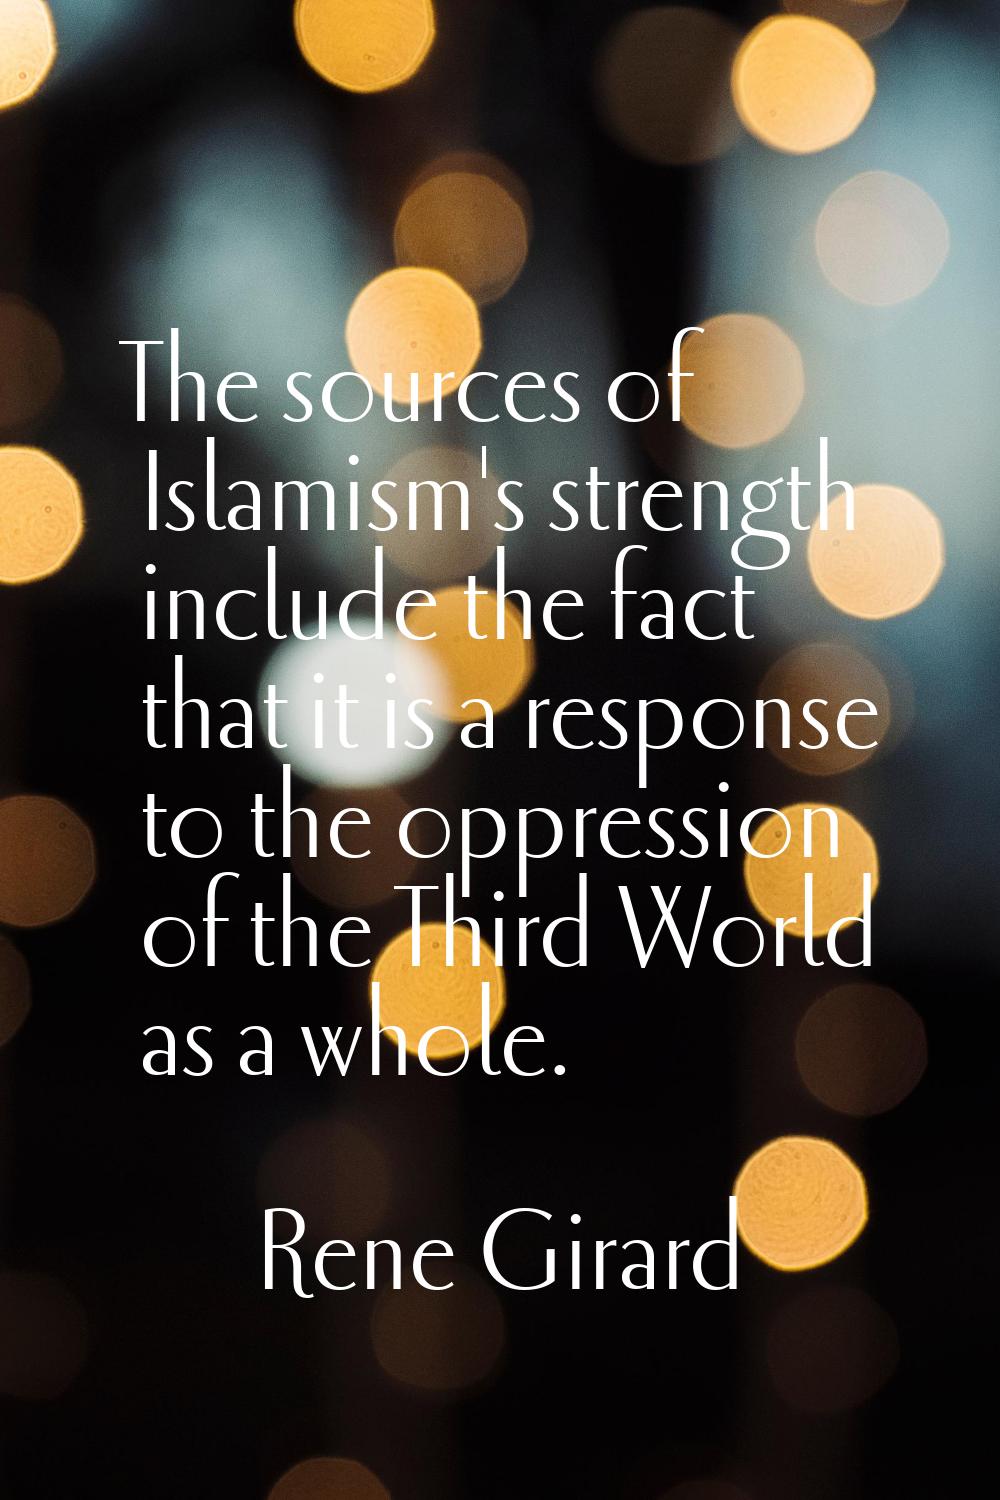 The sources of Islamism's strength include the fact that it is a response to the oppression of the 